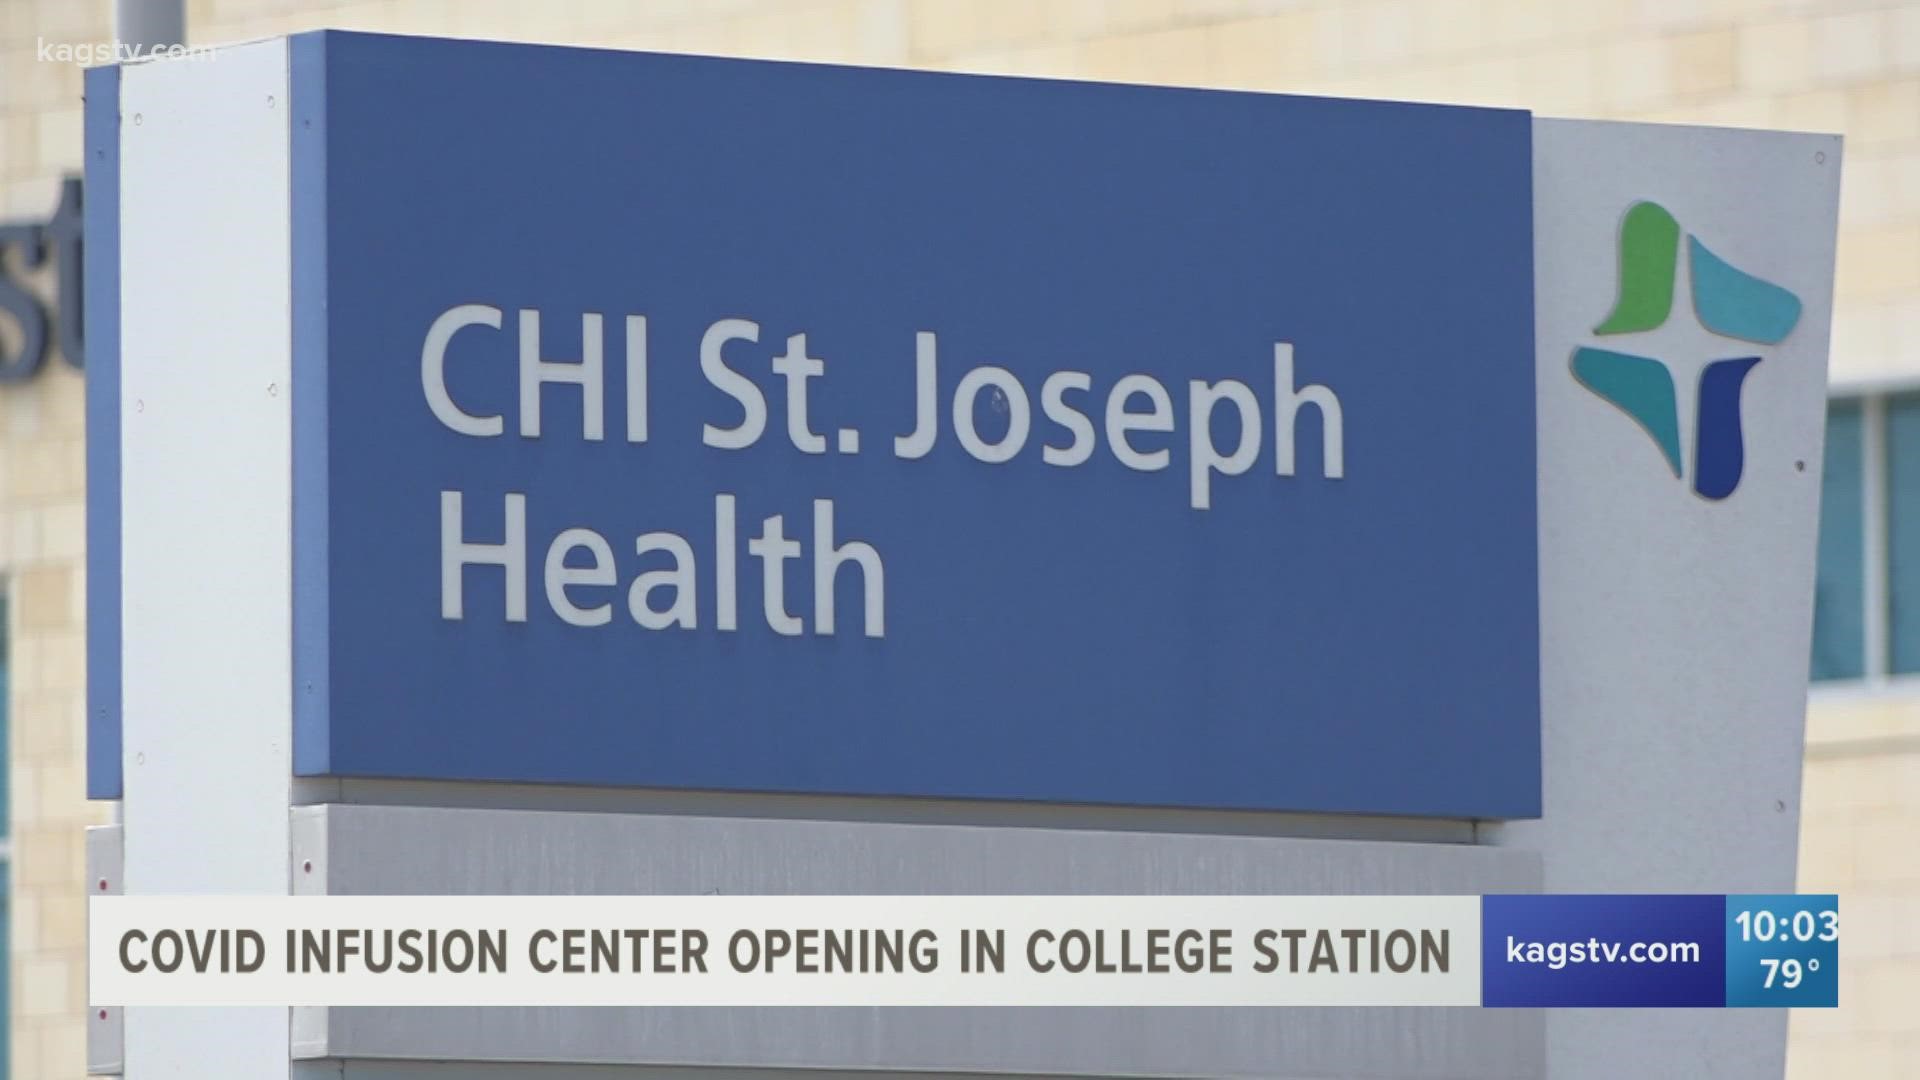 St. Joseph Health will open the center to patients tomorrow.